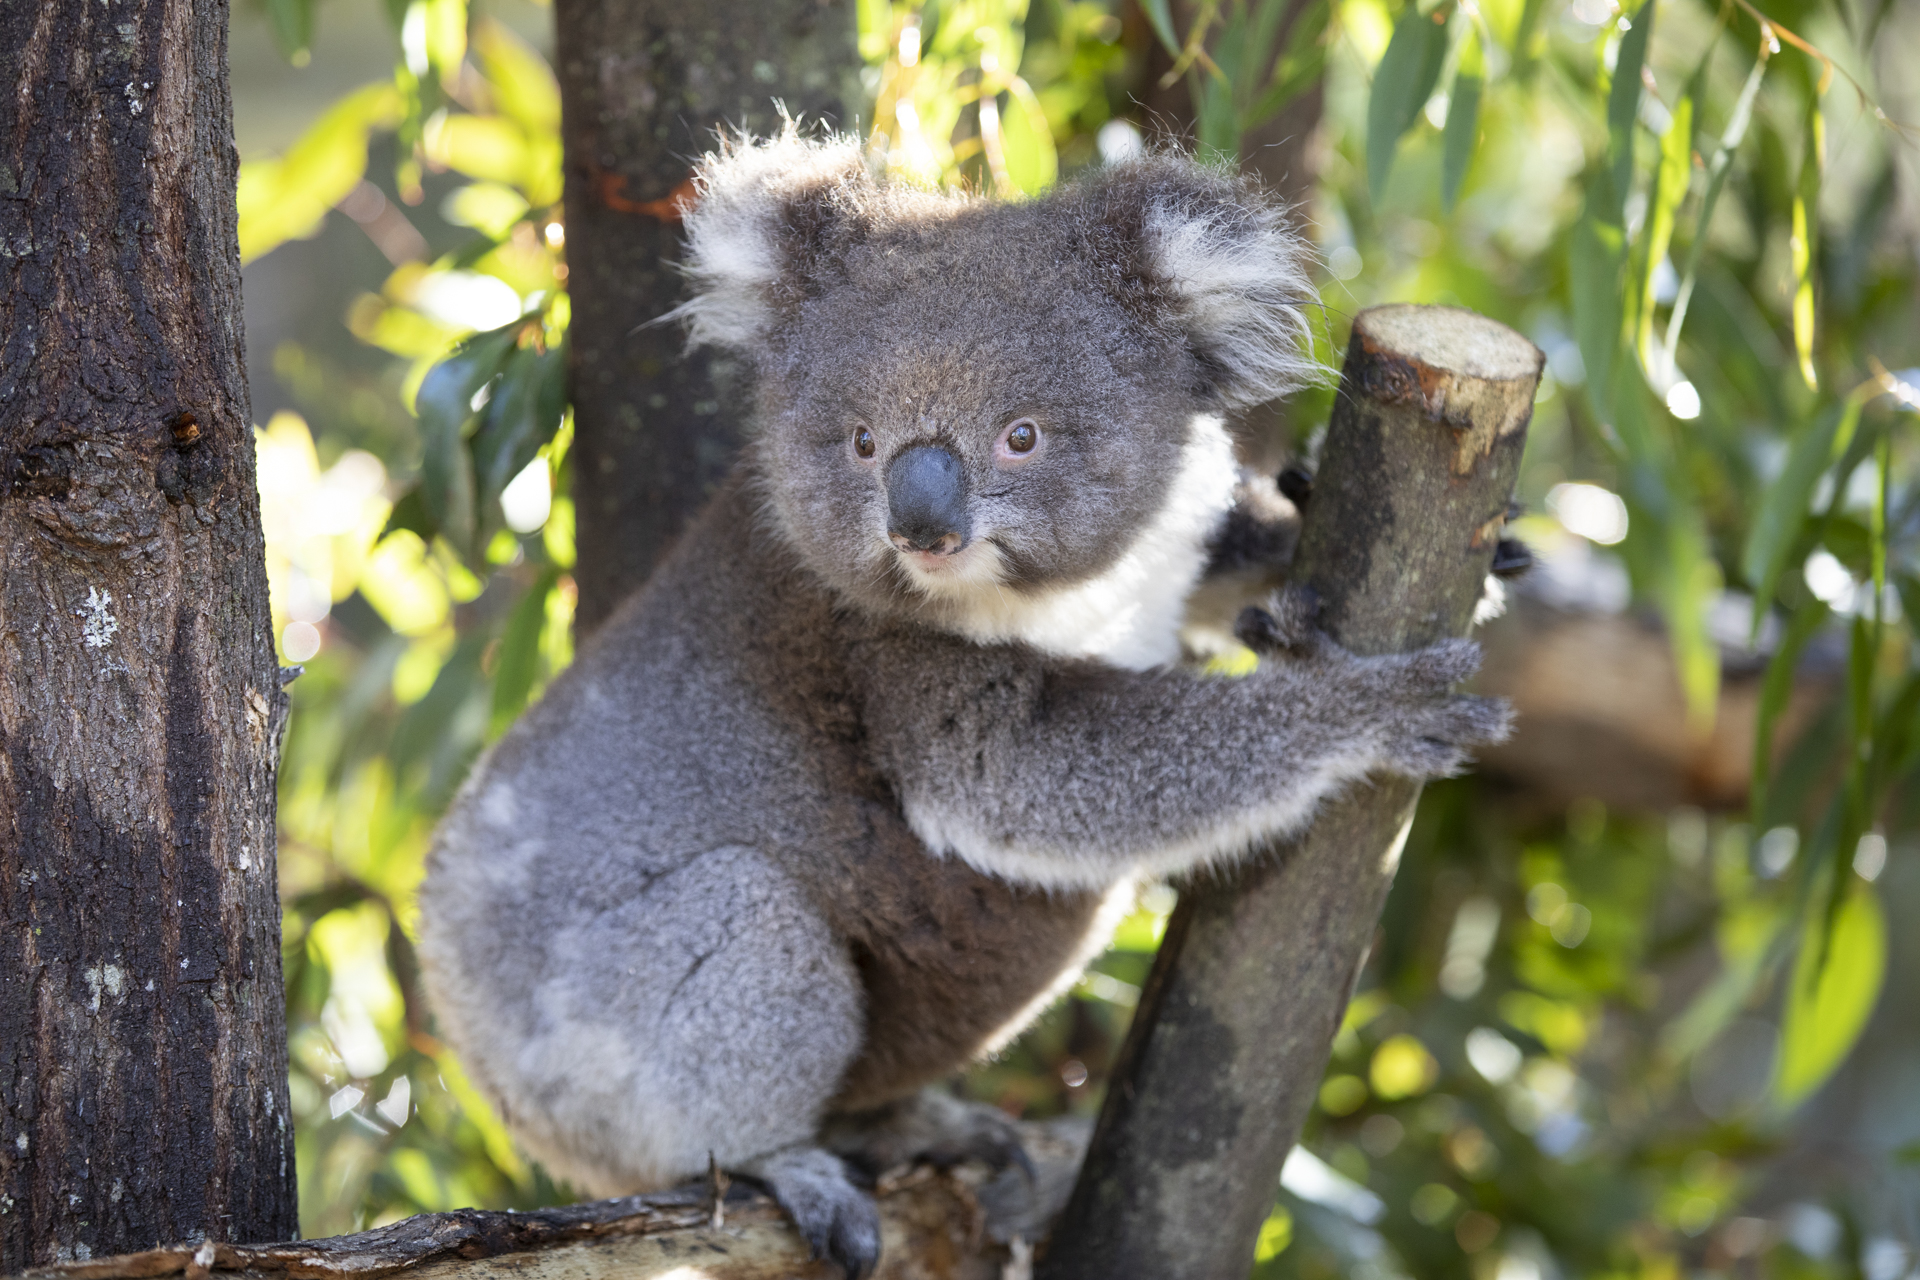 Tidbinbilla's koalas finally return home, with one or two new arrivals